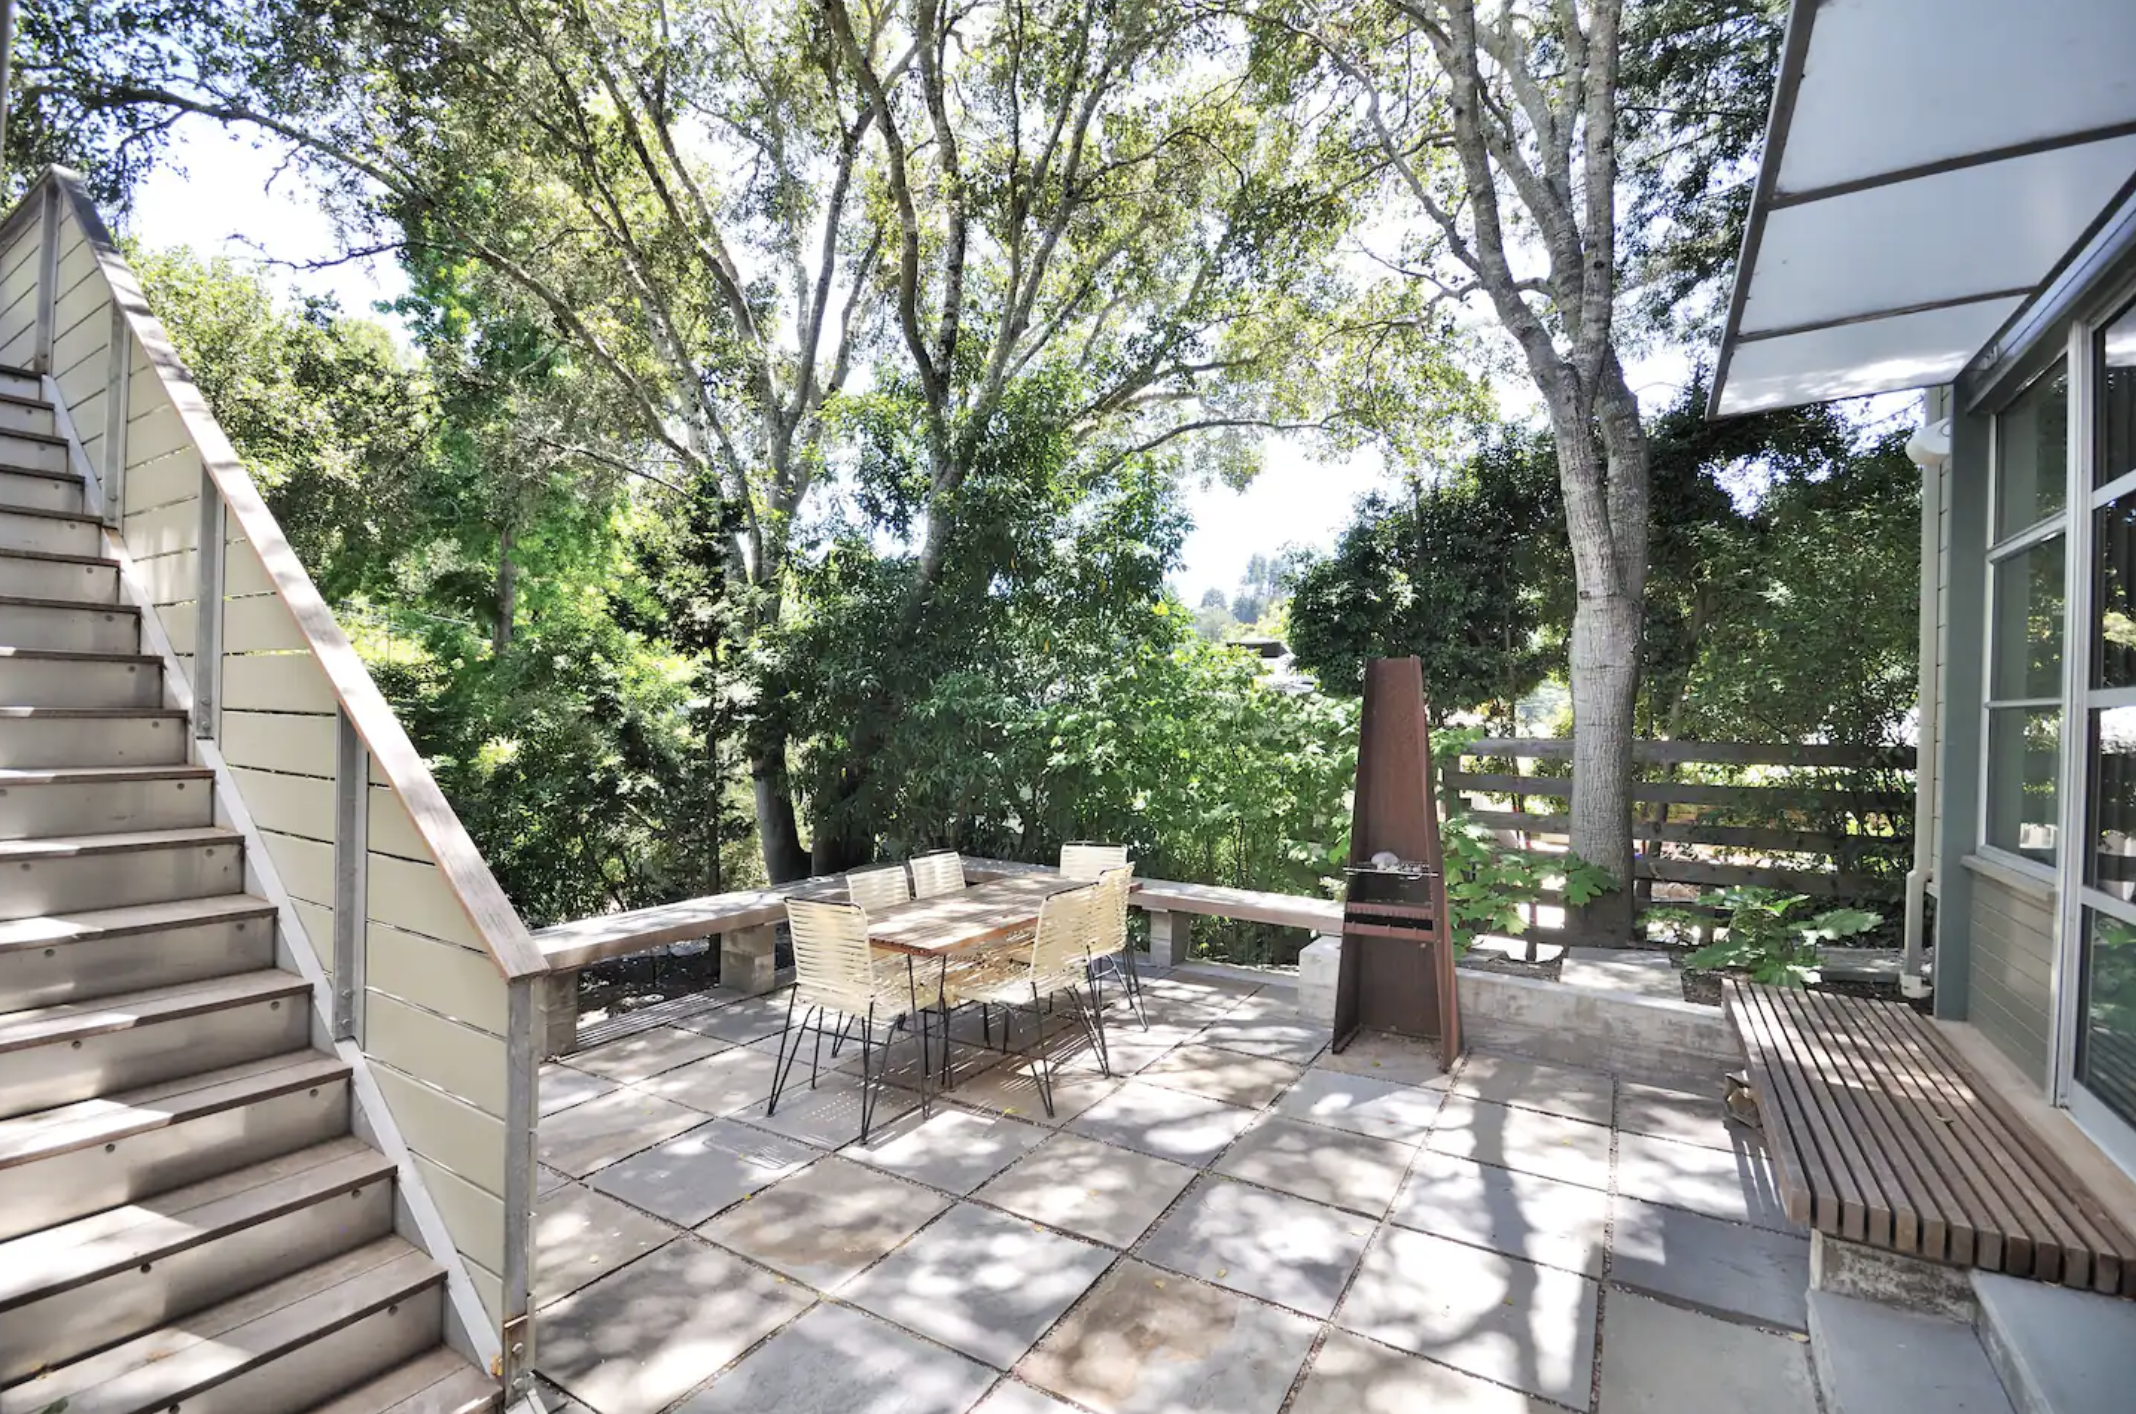 Mill Valley | 2 Bed 2.5 Bath Redwood Grove Treehouse Retreat